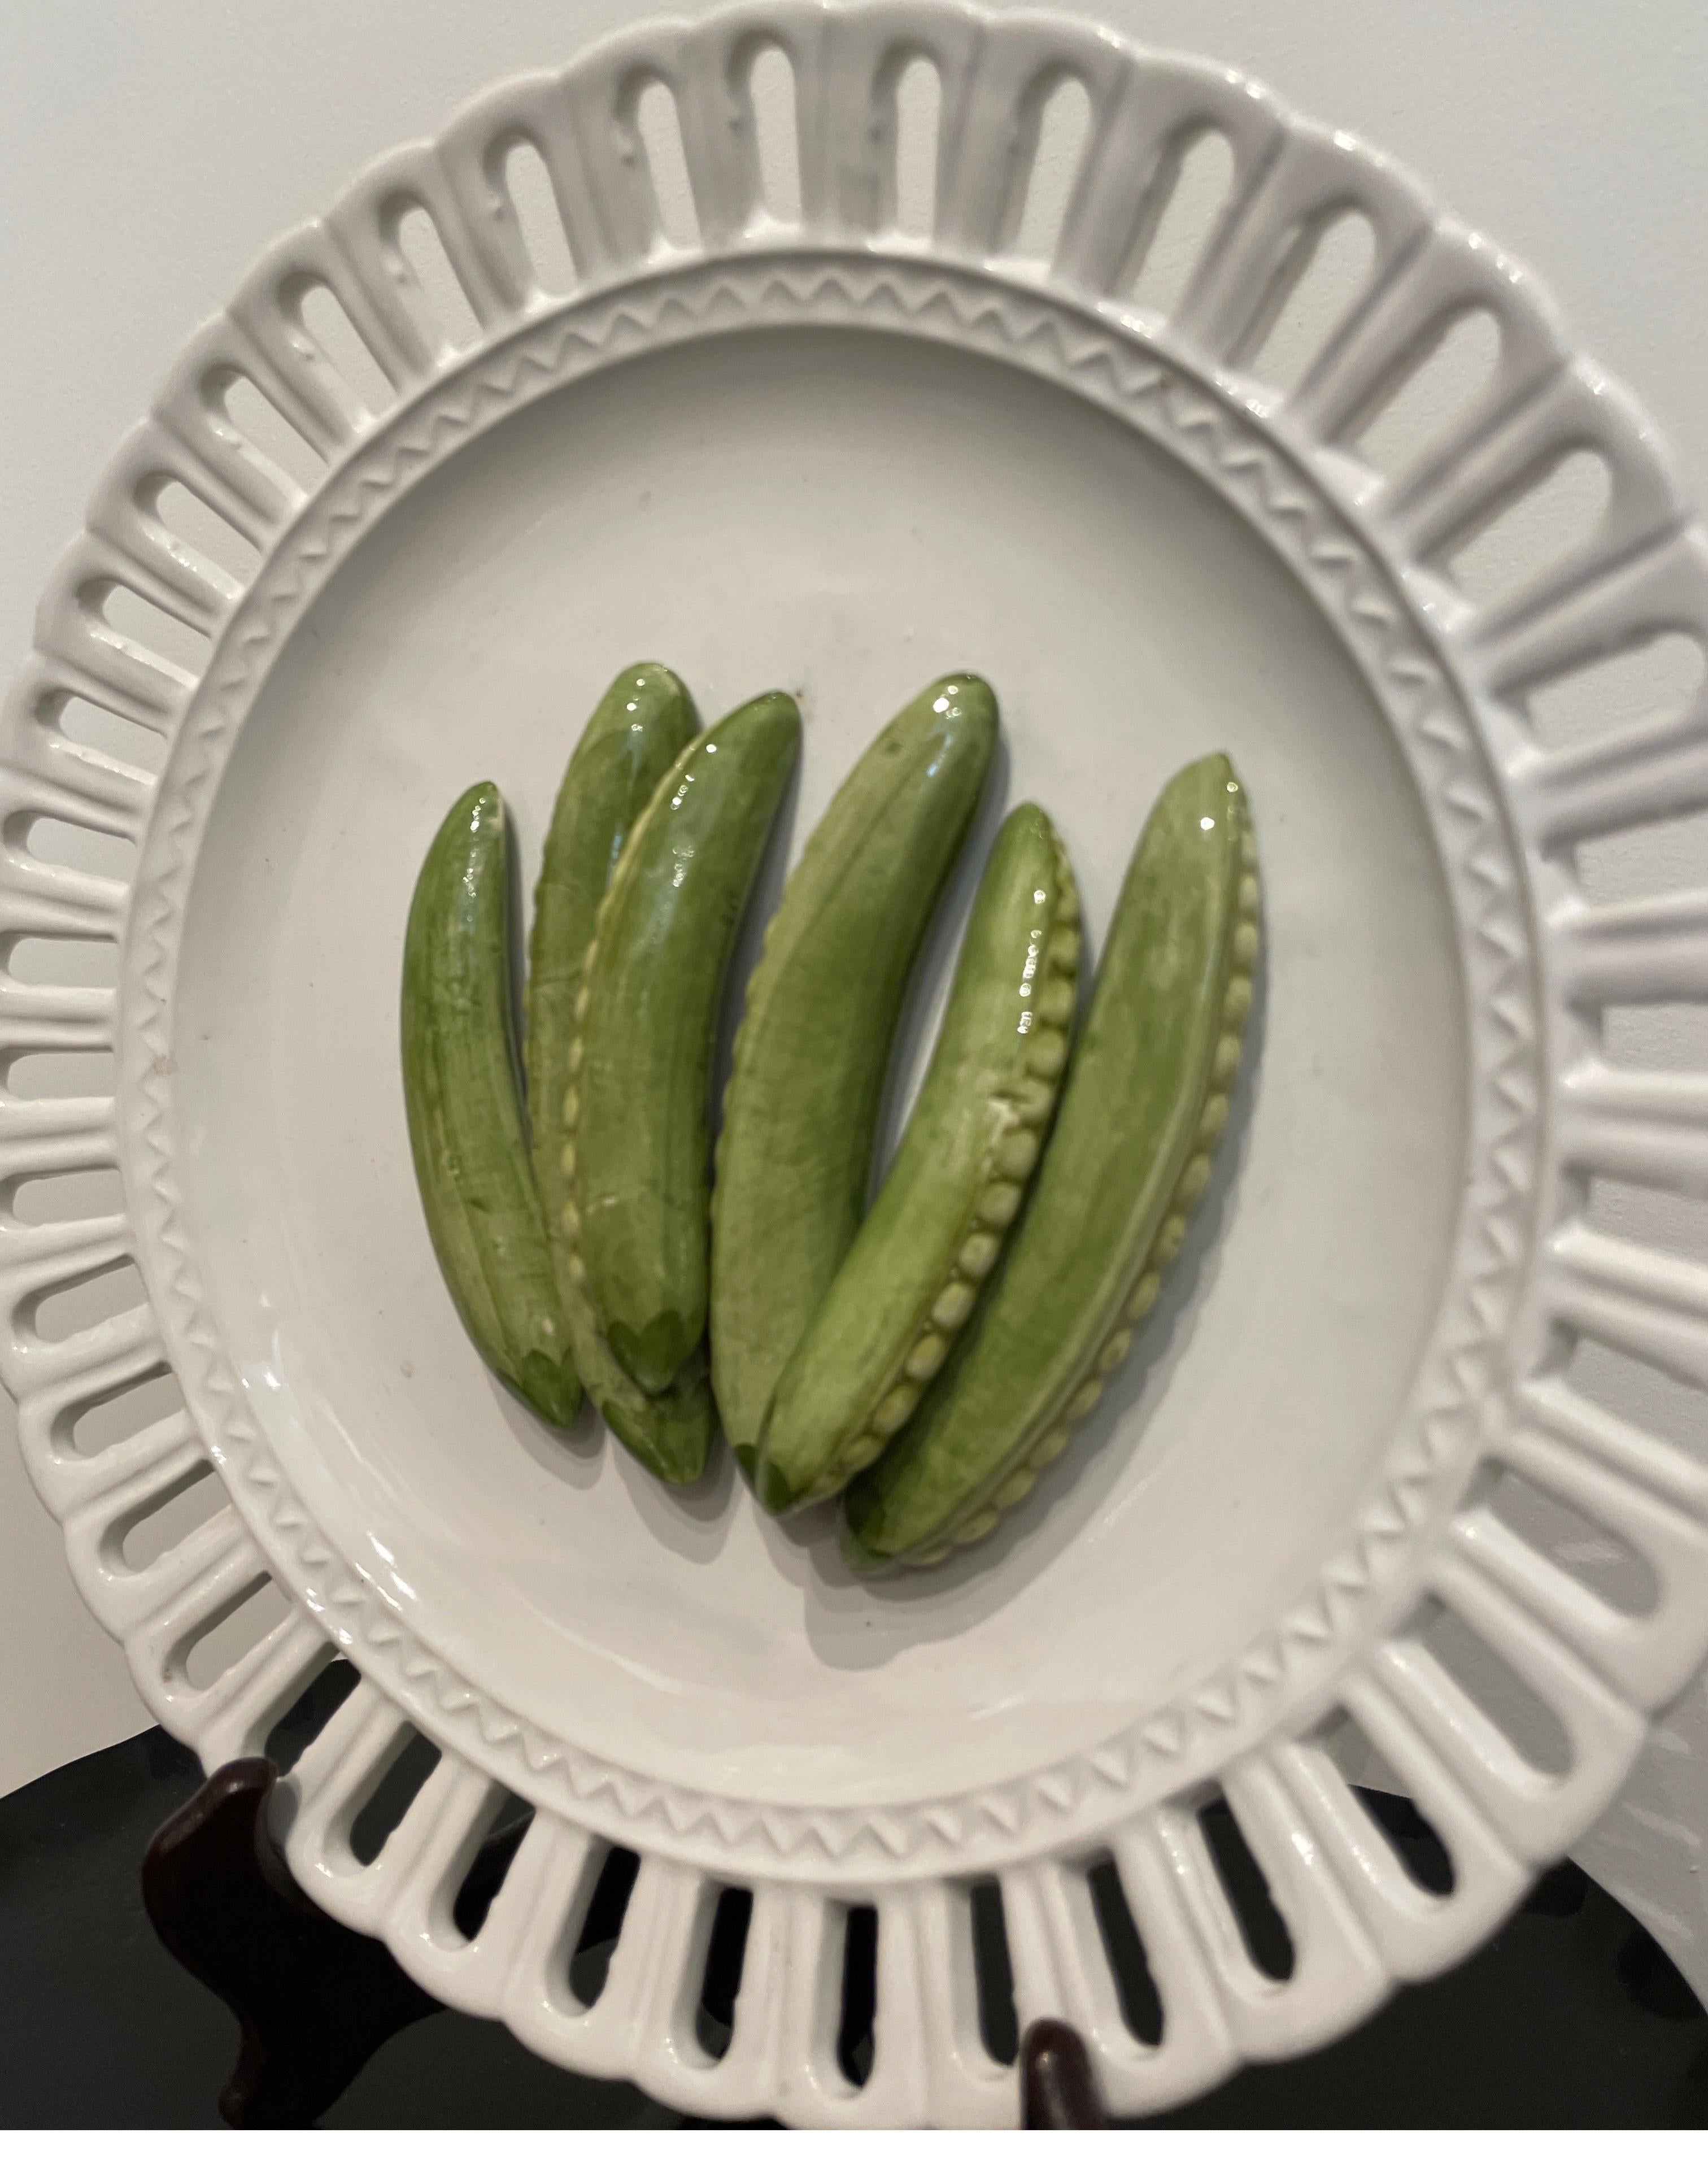 Very sweet single Trompe L'oeil white pierced border plate with several pea pods in the center. This plate would be a great start to a collection or an addition to an existing one. A lovely piece.